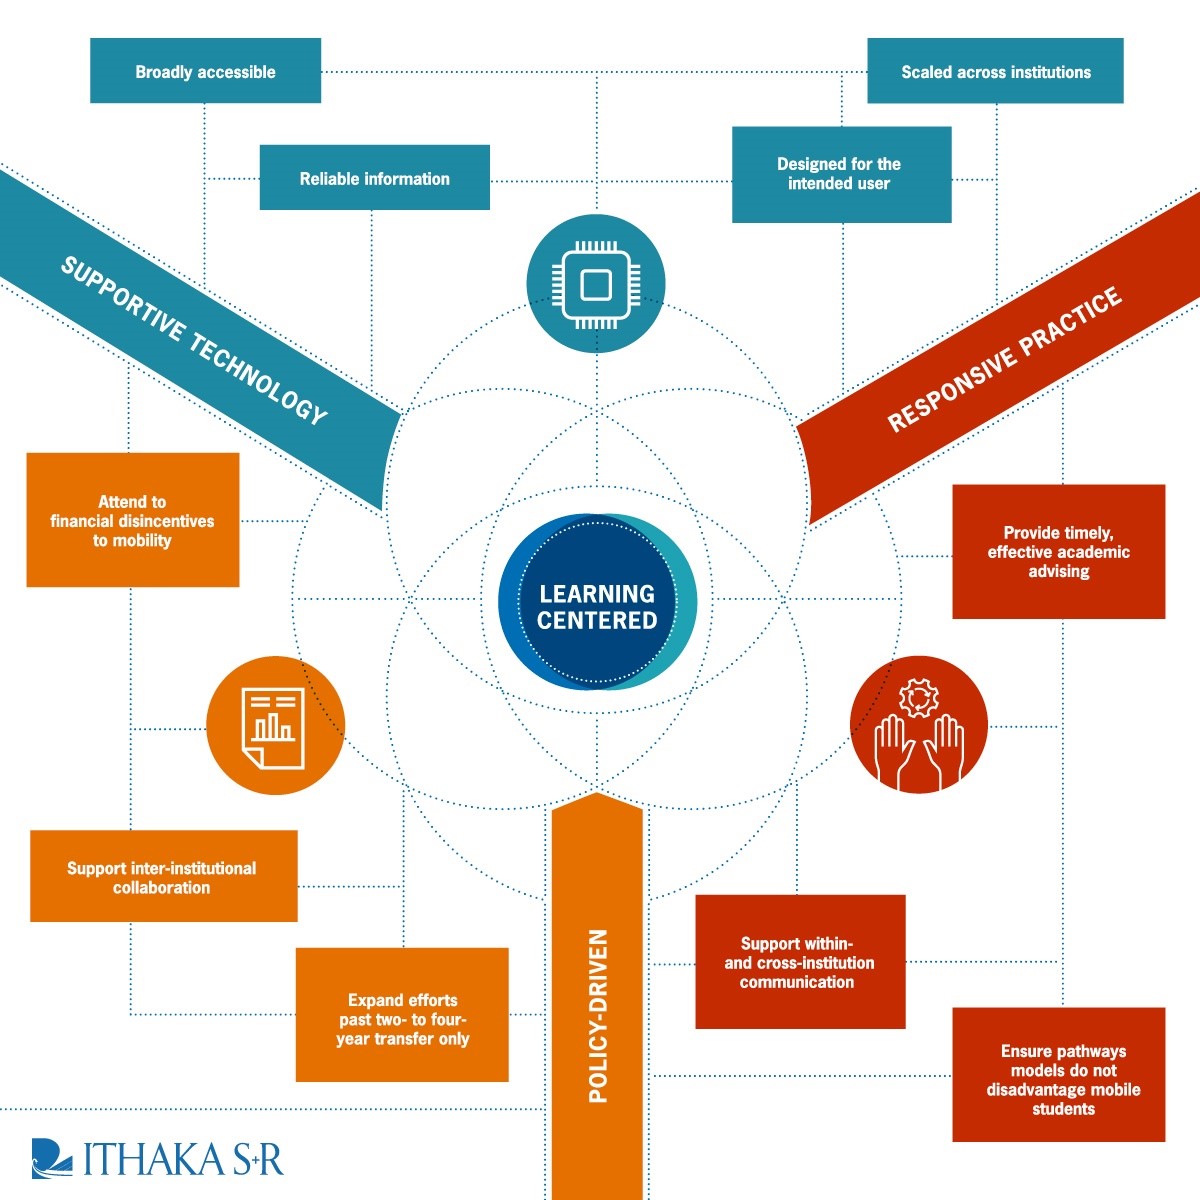 centering learning impacts technology, policy, and practice